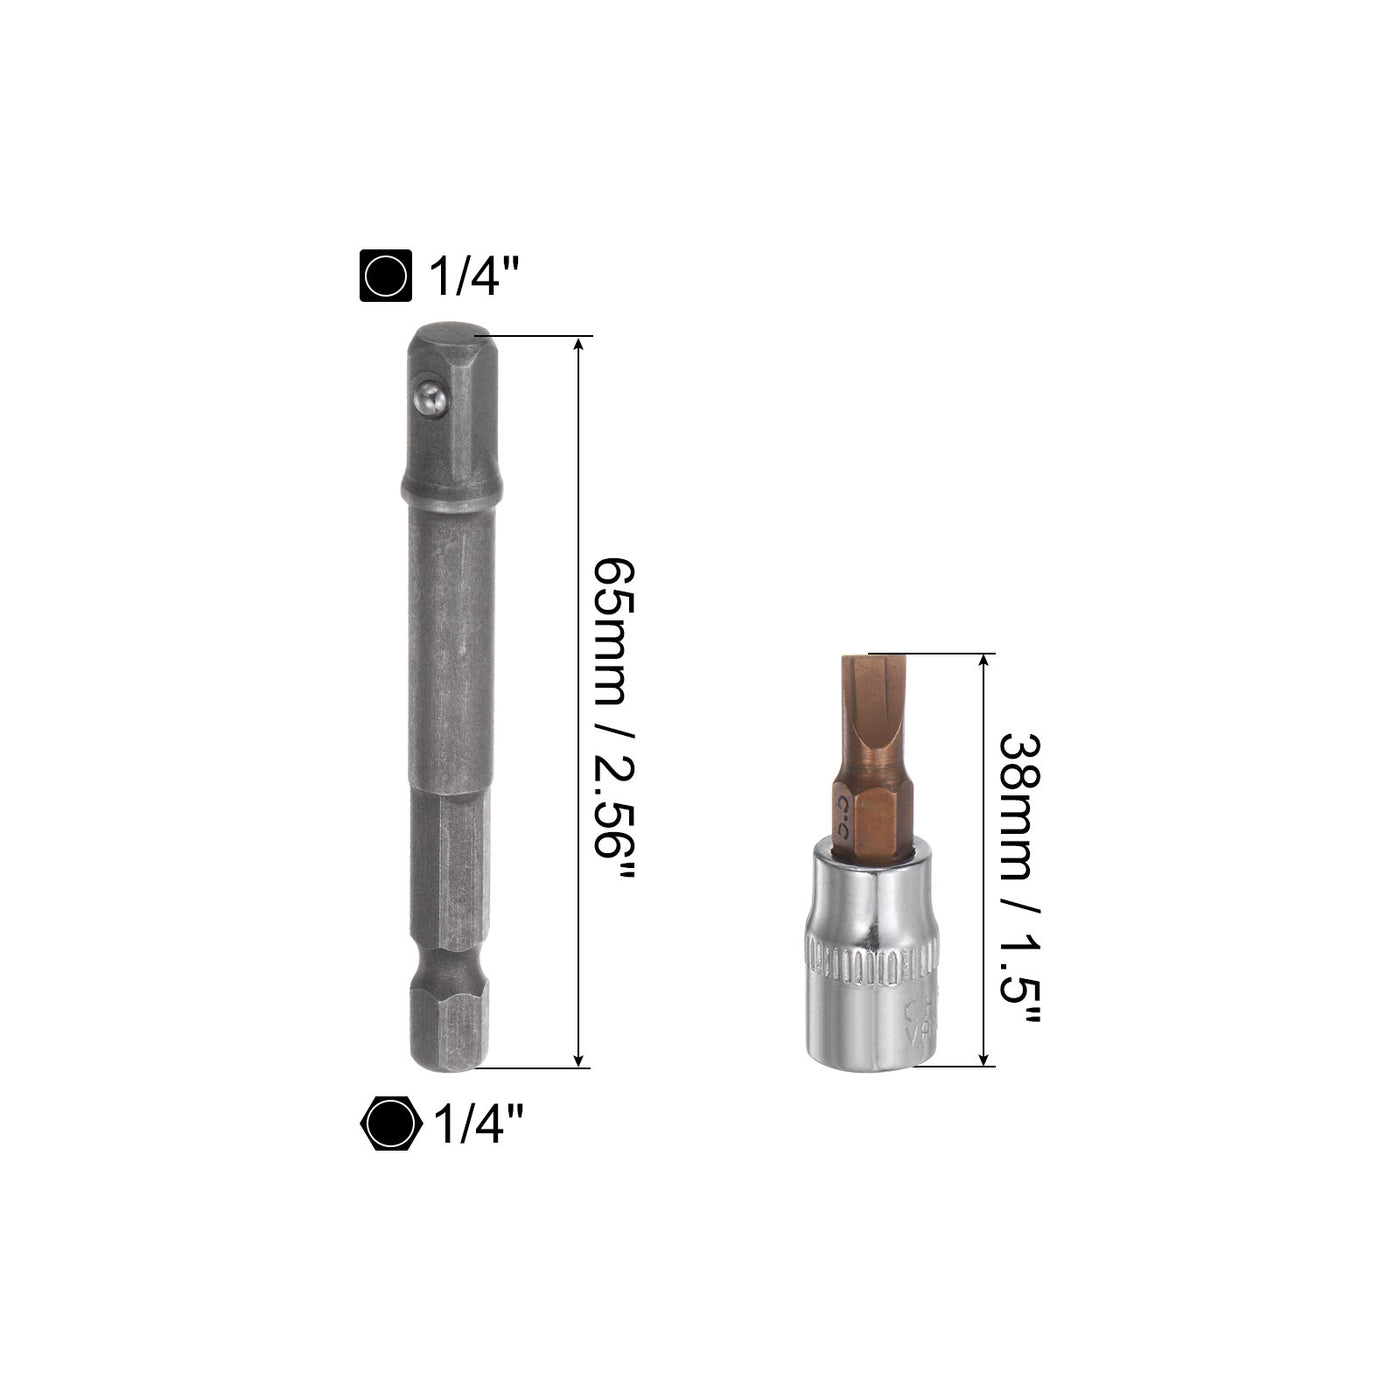 uxcell Uxcell FD5.5 Slotted Bit Socket, 1/4" Drive 1.5" Length W Hex Shank Power Drill Adapter